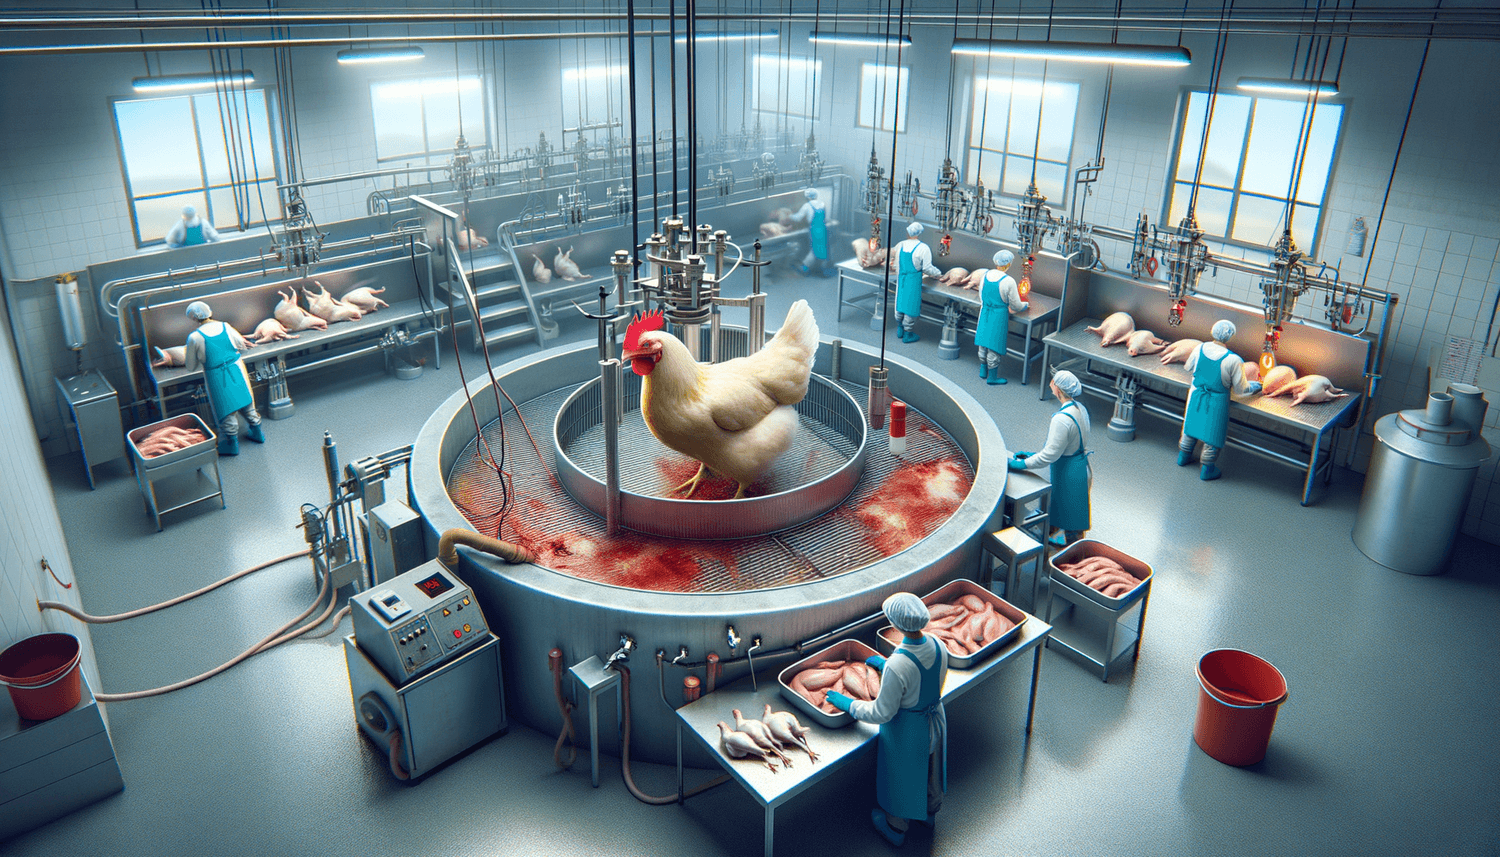 How Are Chickens Slaughtered?